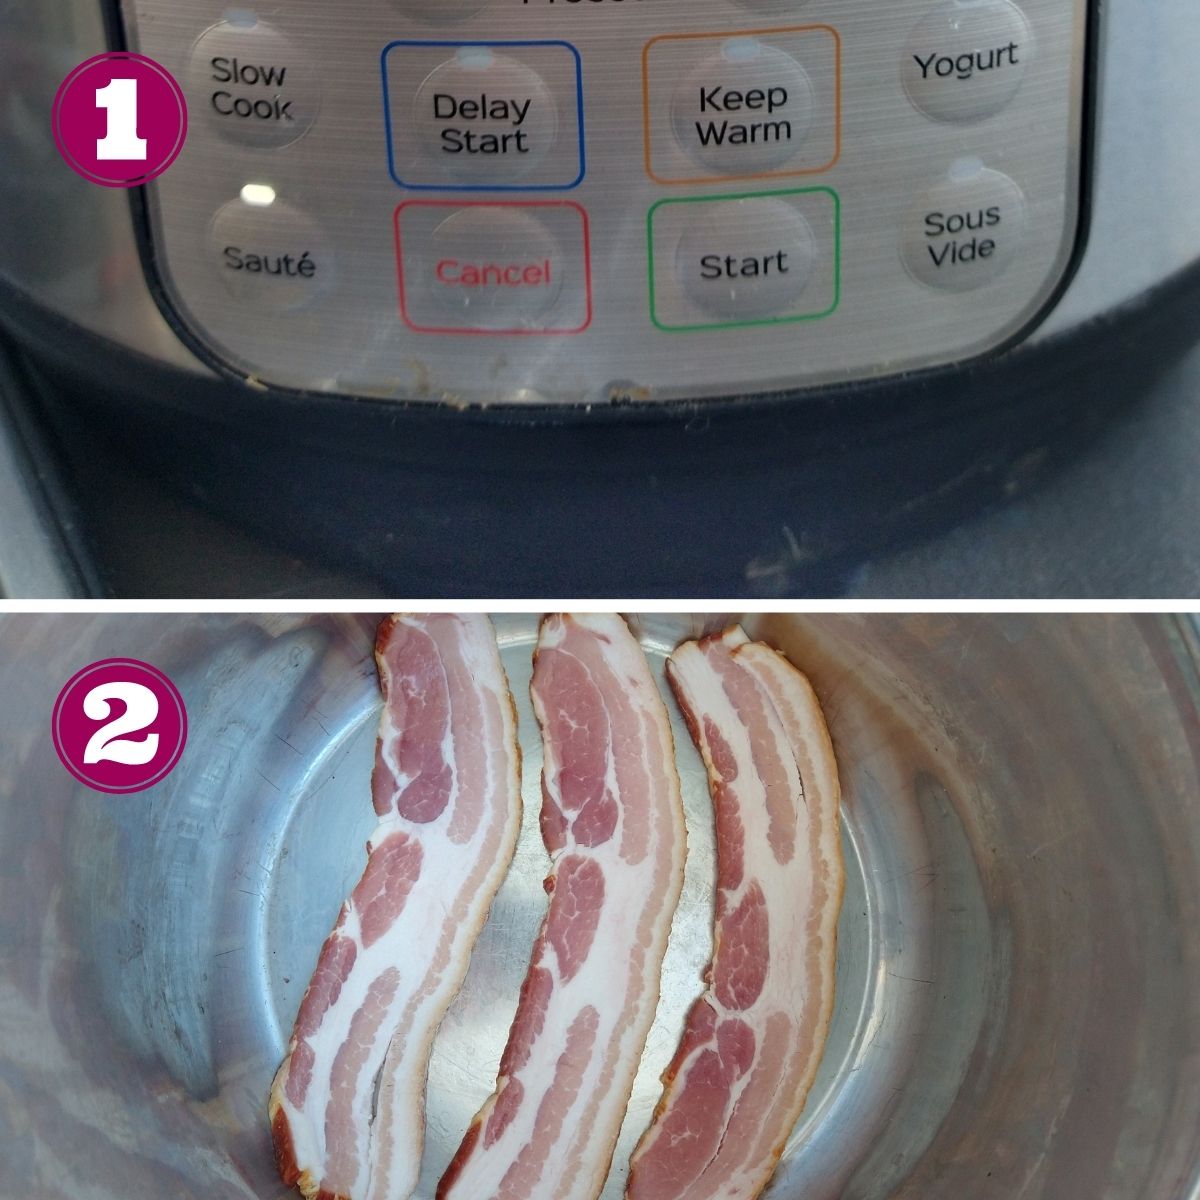 Step 1 shows the Instant Pot sauté button has been pushed.
Step 2 shows raw bacon in a cold Instant Pot.